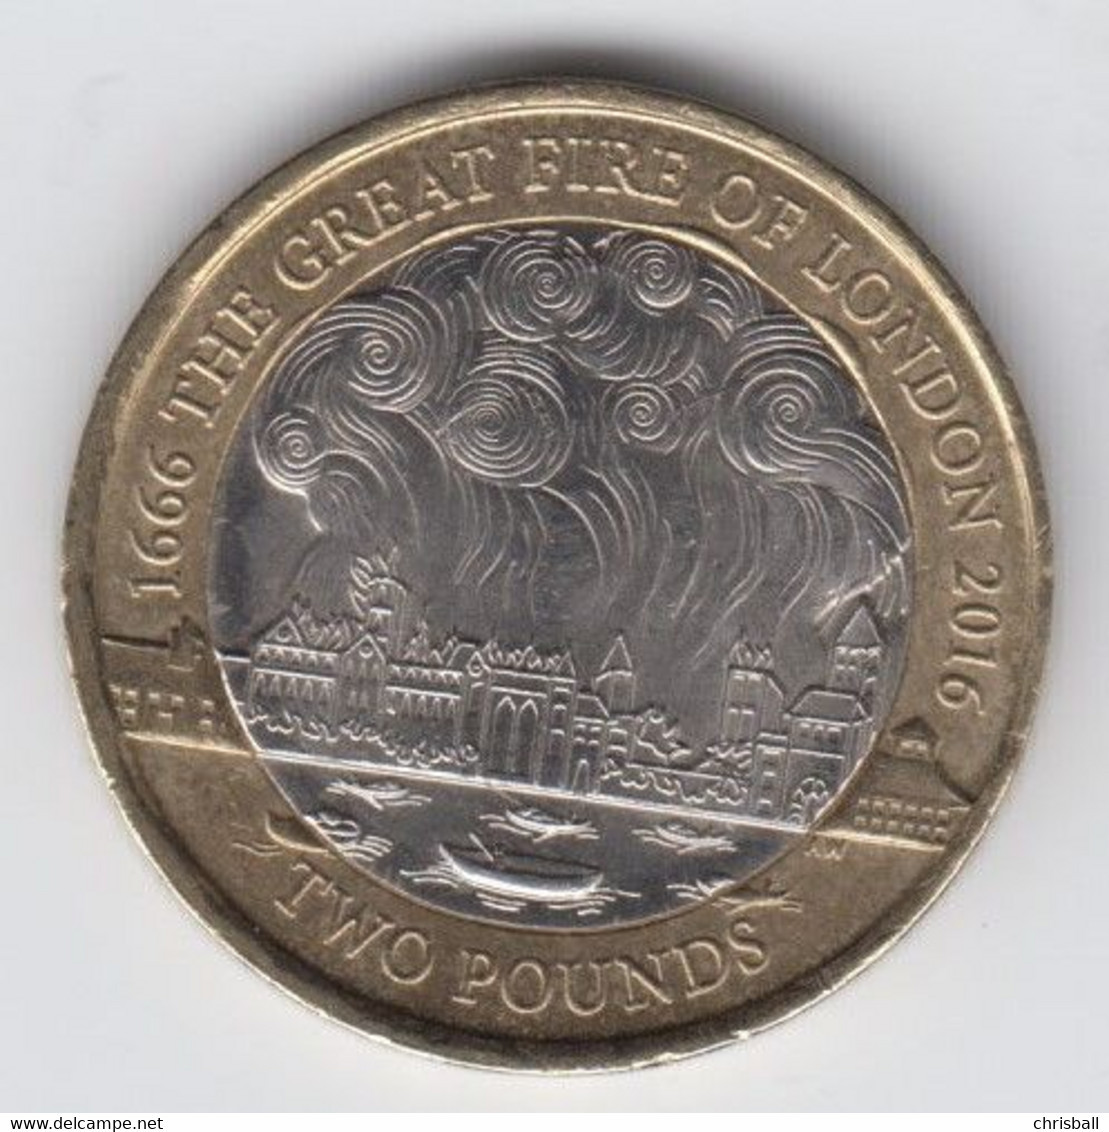 Great Britain UK £2 Two Pound Coin 2016 (Great Fire Of London) - Circulated - 2 Pond